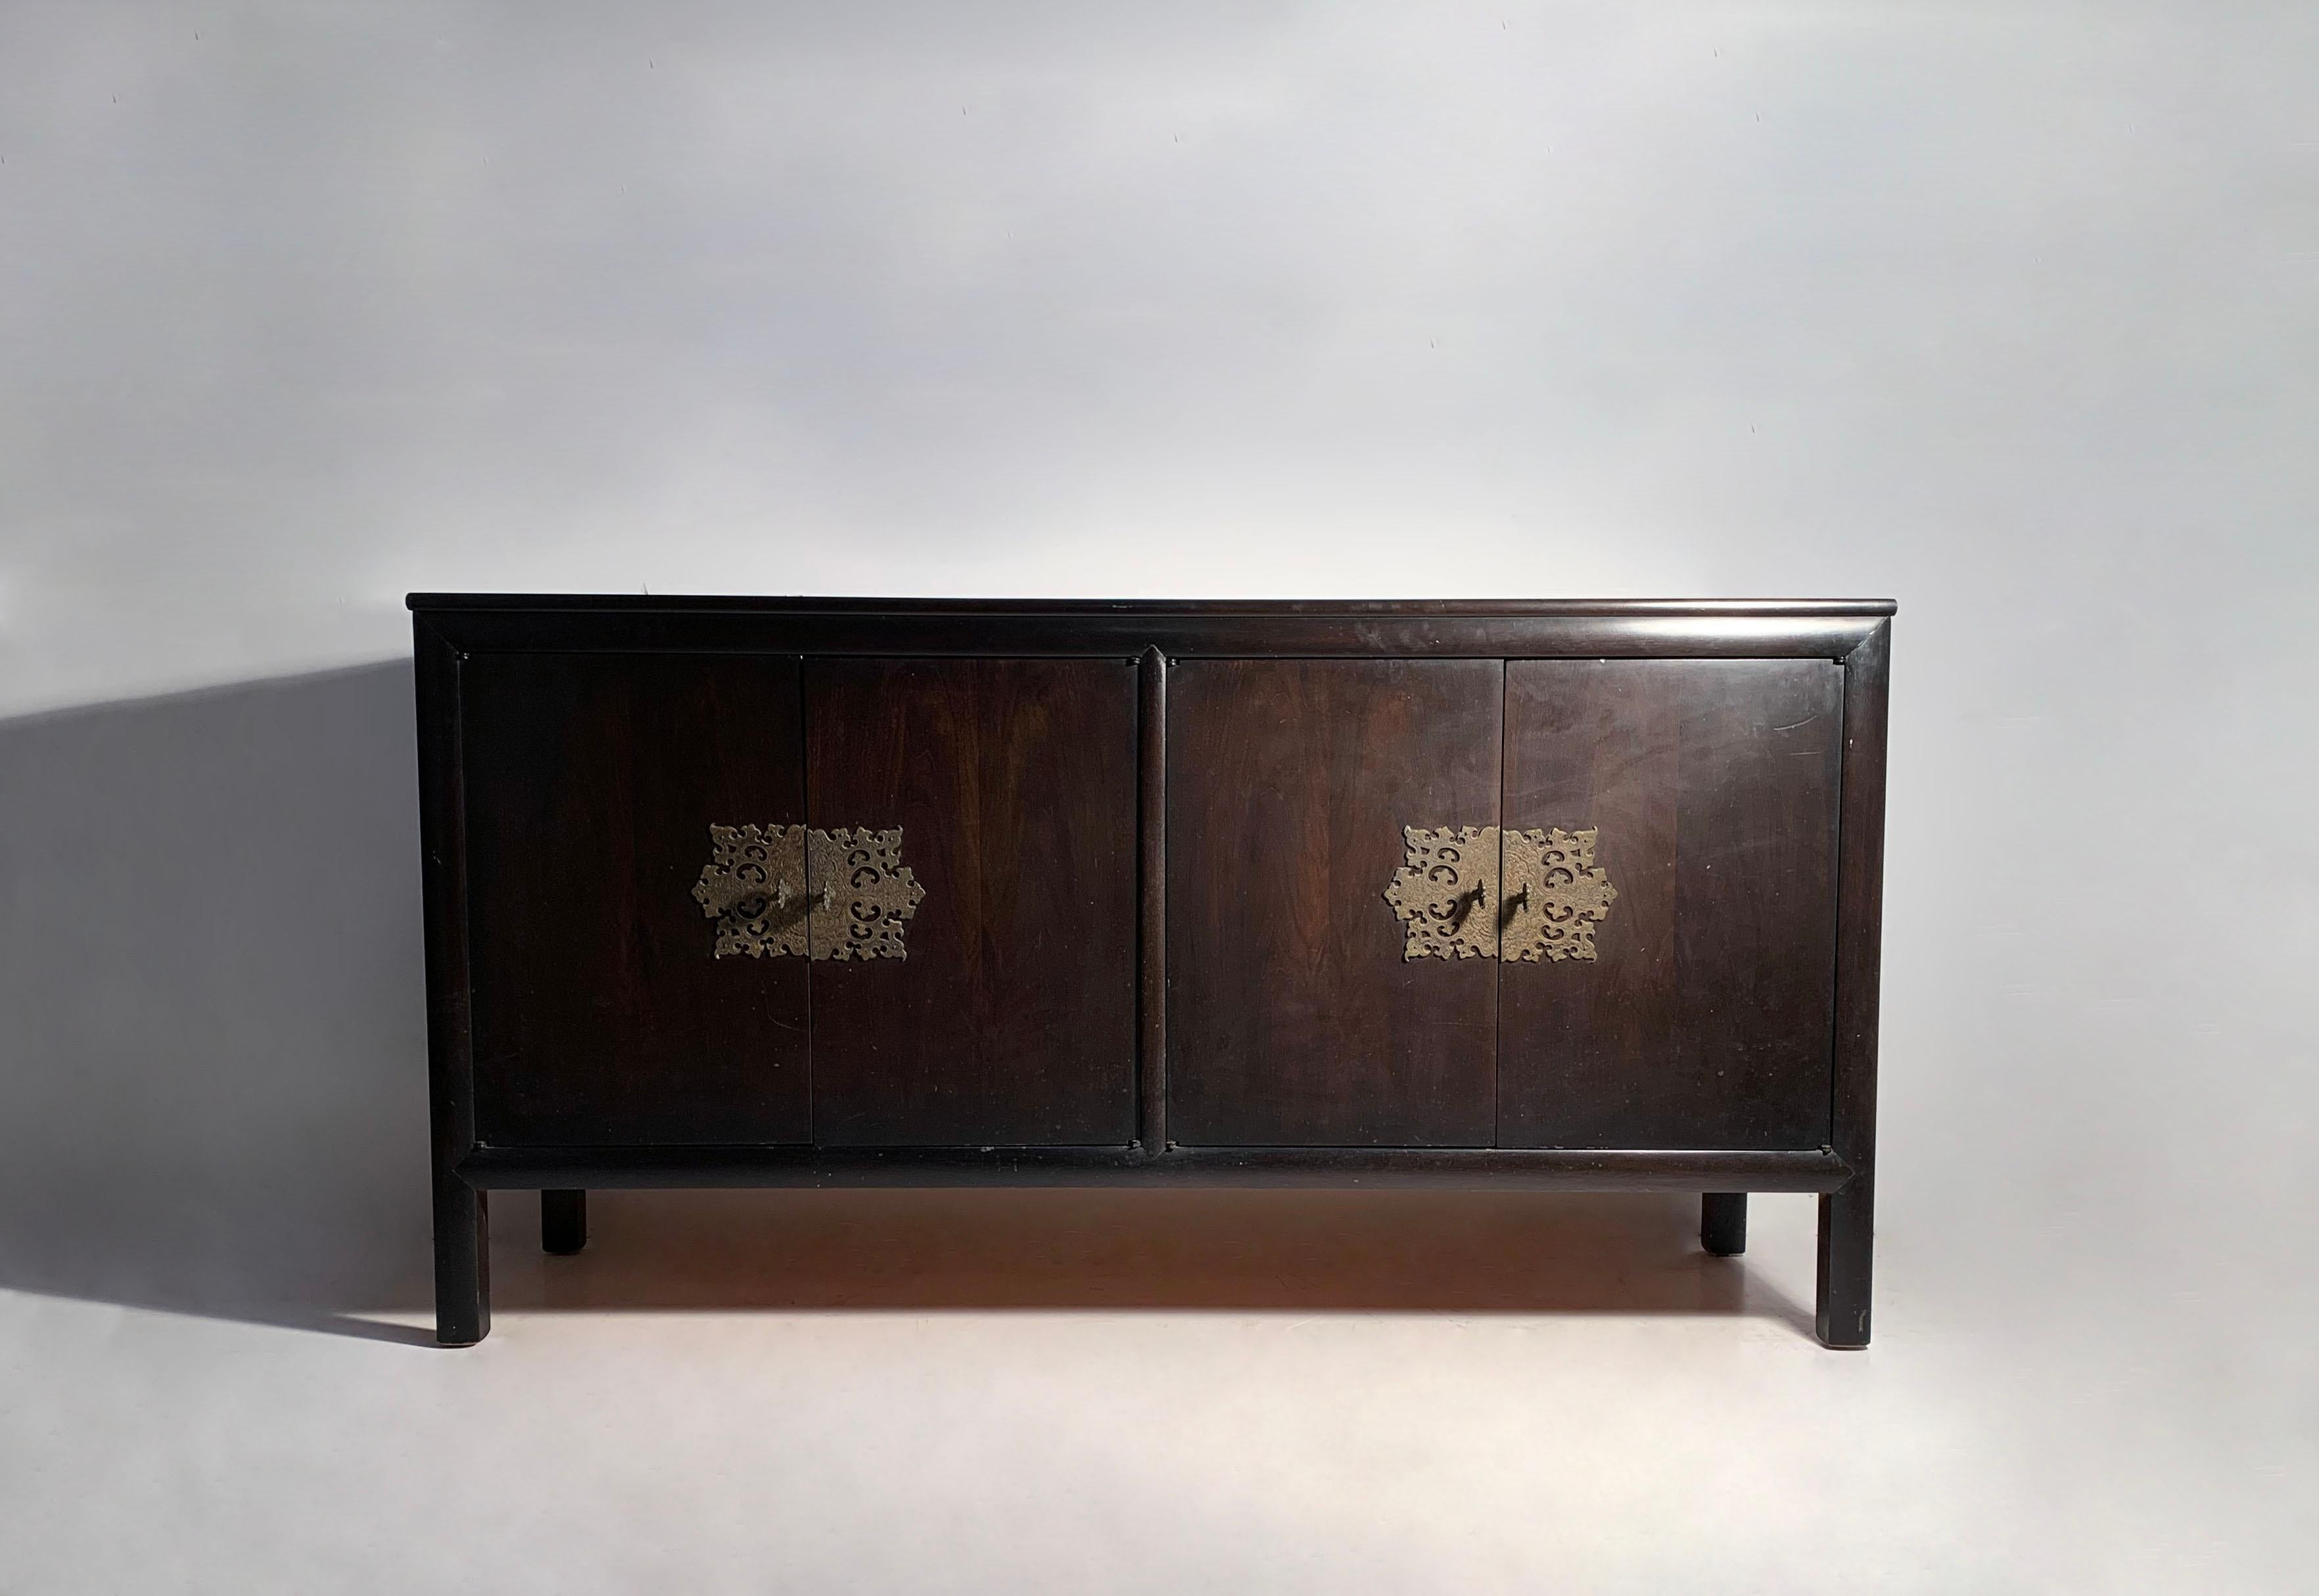 Vintage Credenza Cabinet. Finished on all sides including the back as shown.